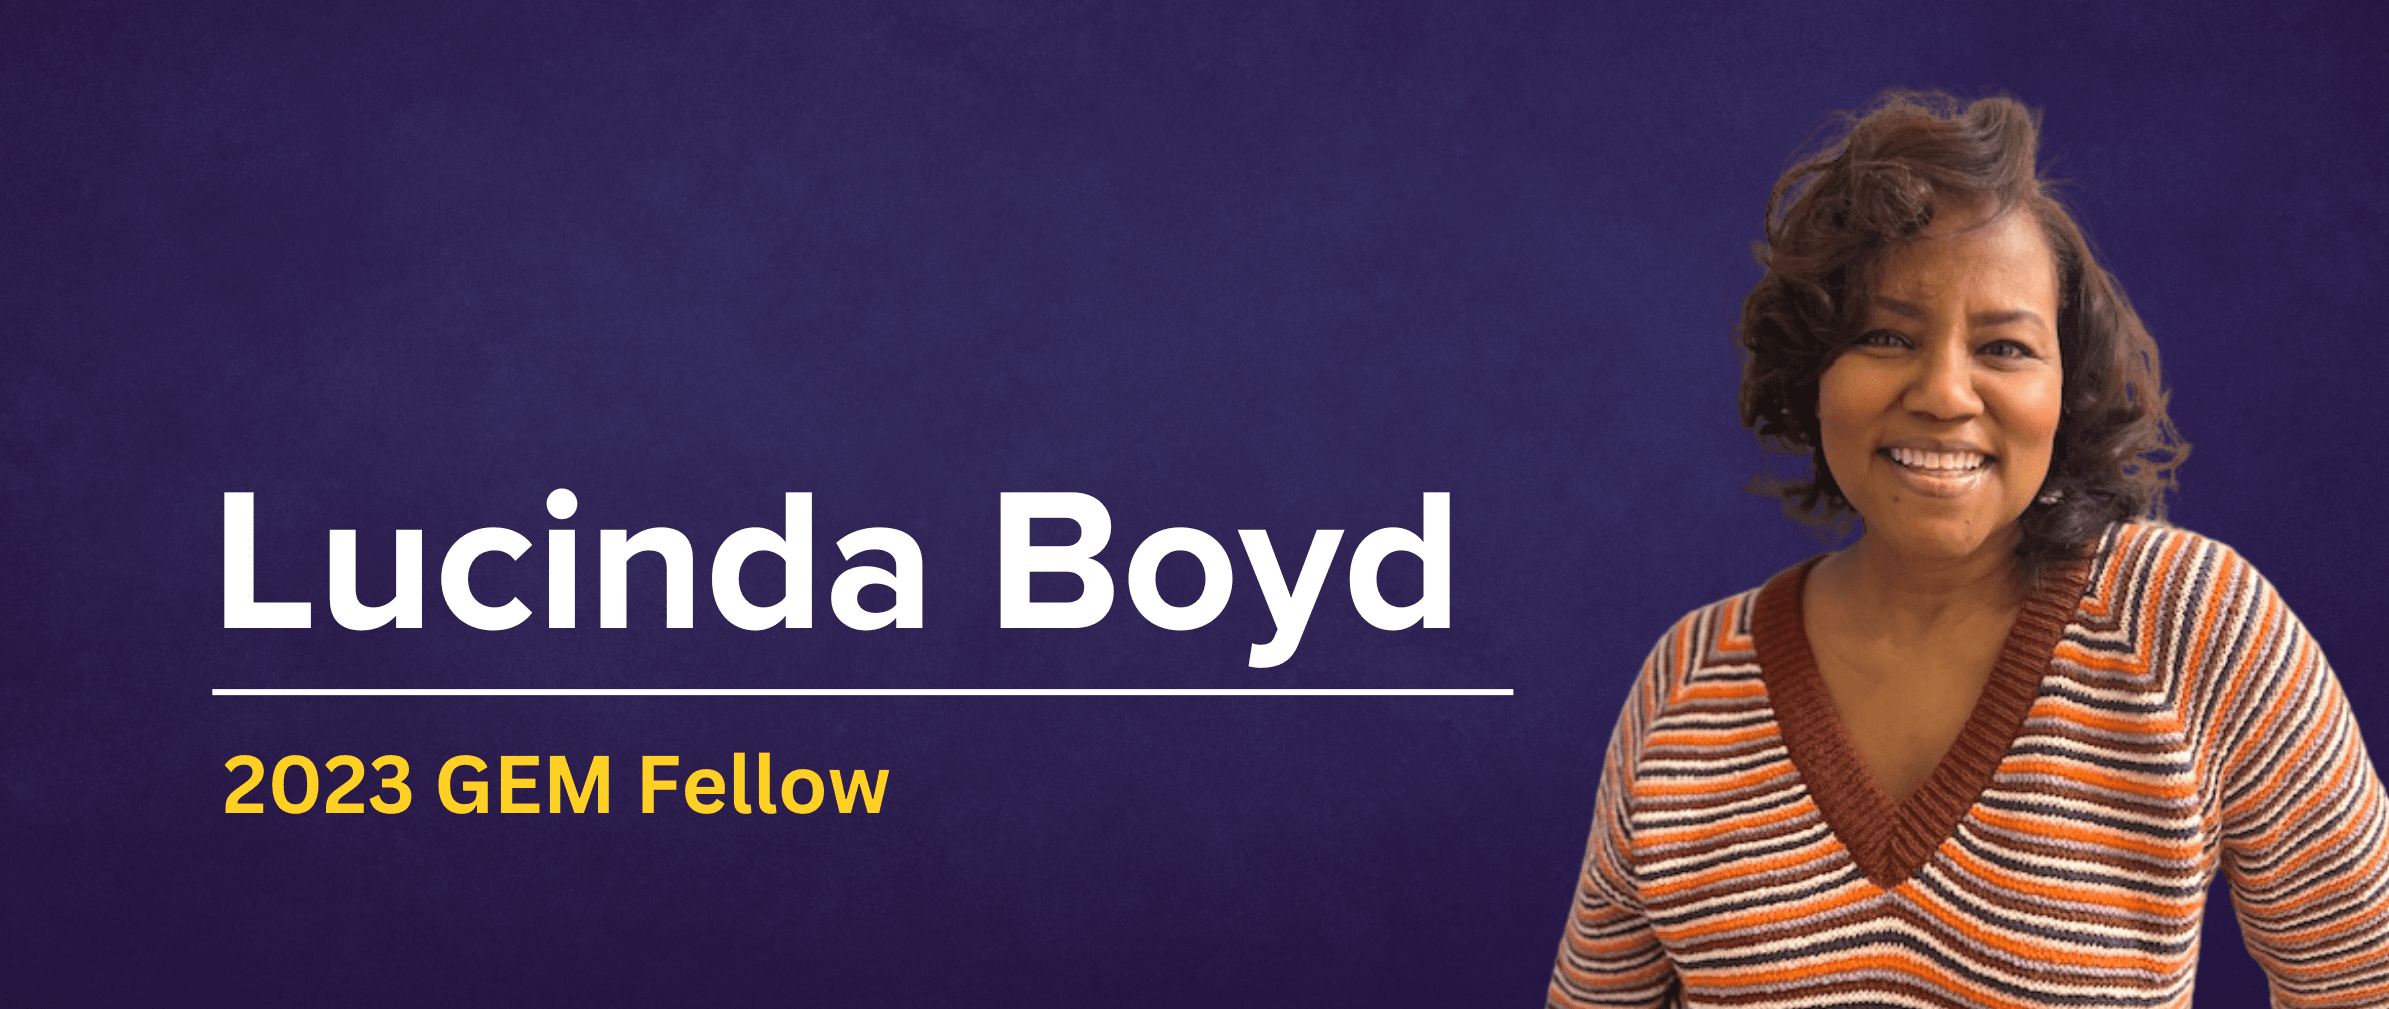 Lucinda Boyd with name and GEM Fellow text